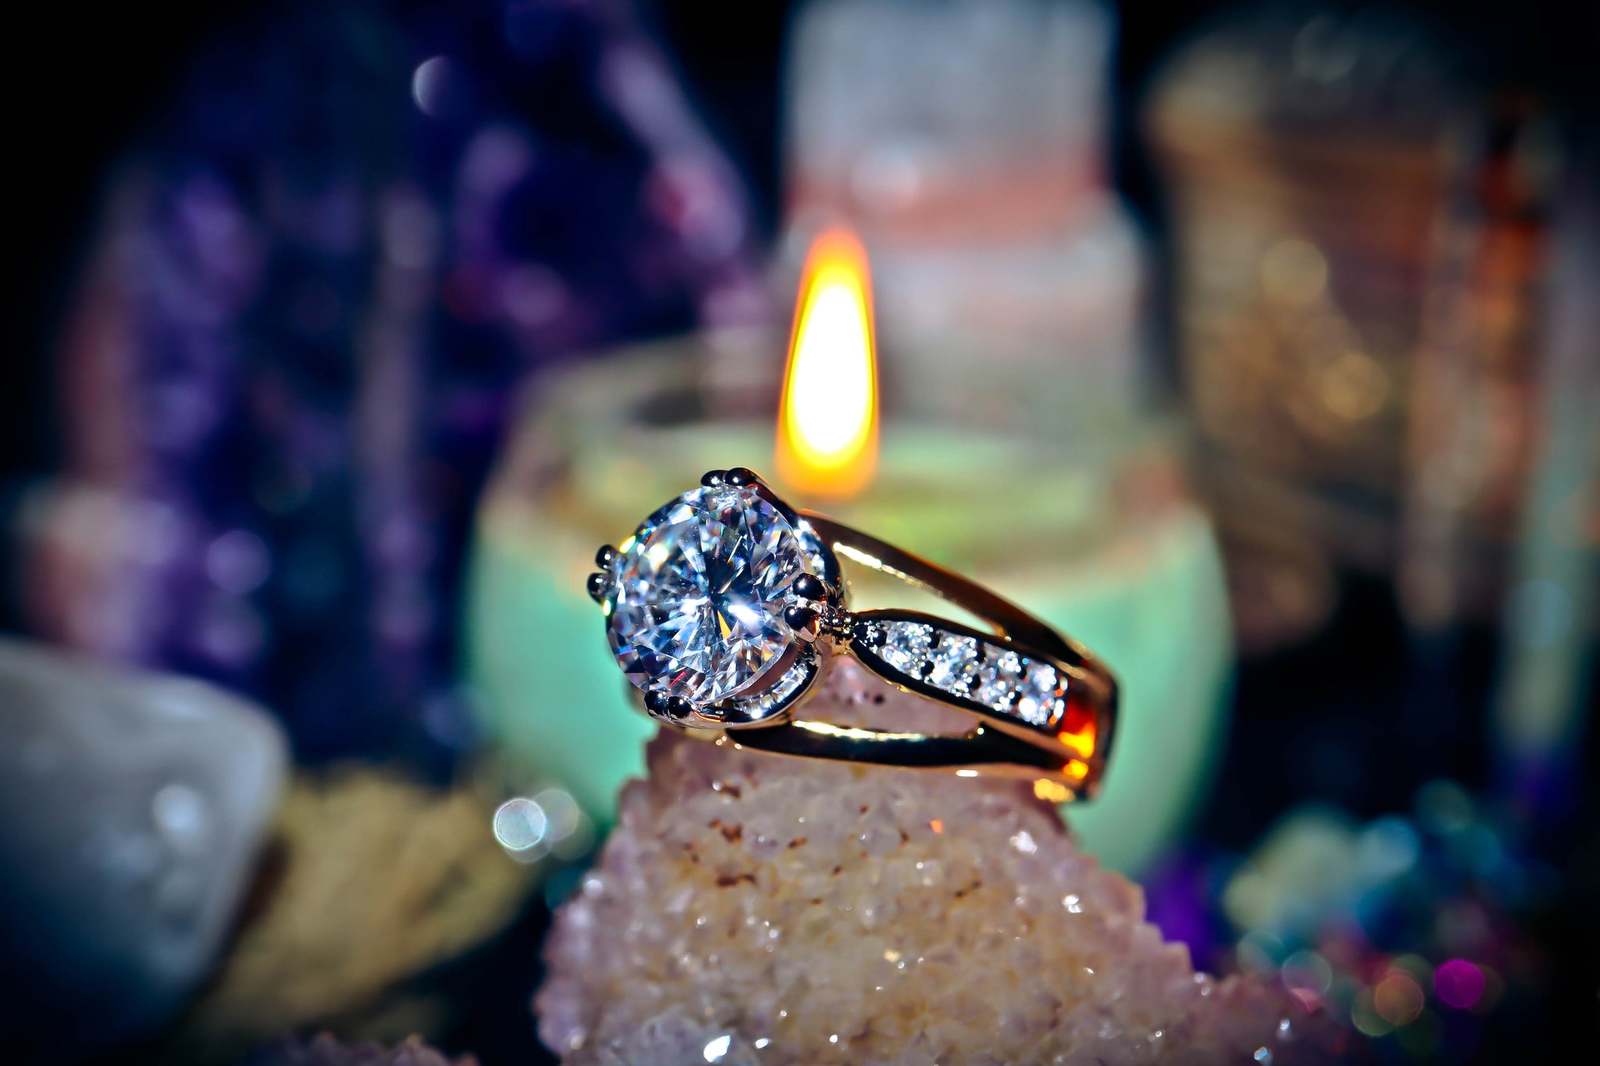 FAST MONEY X10 Haunted Ring Spell Wealth Riches Pagan LUCK Magic Lottery $$$ - $65.00